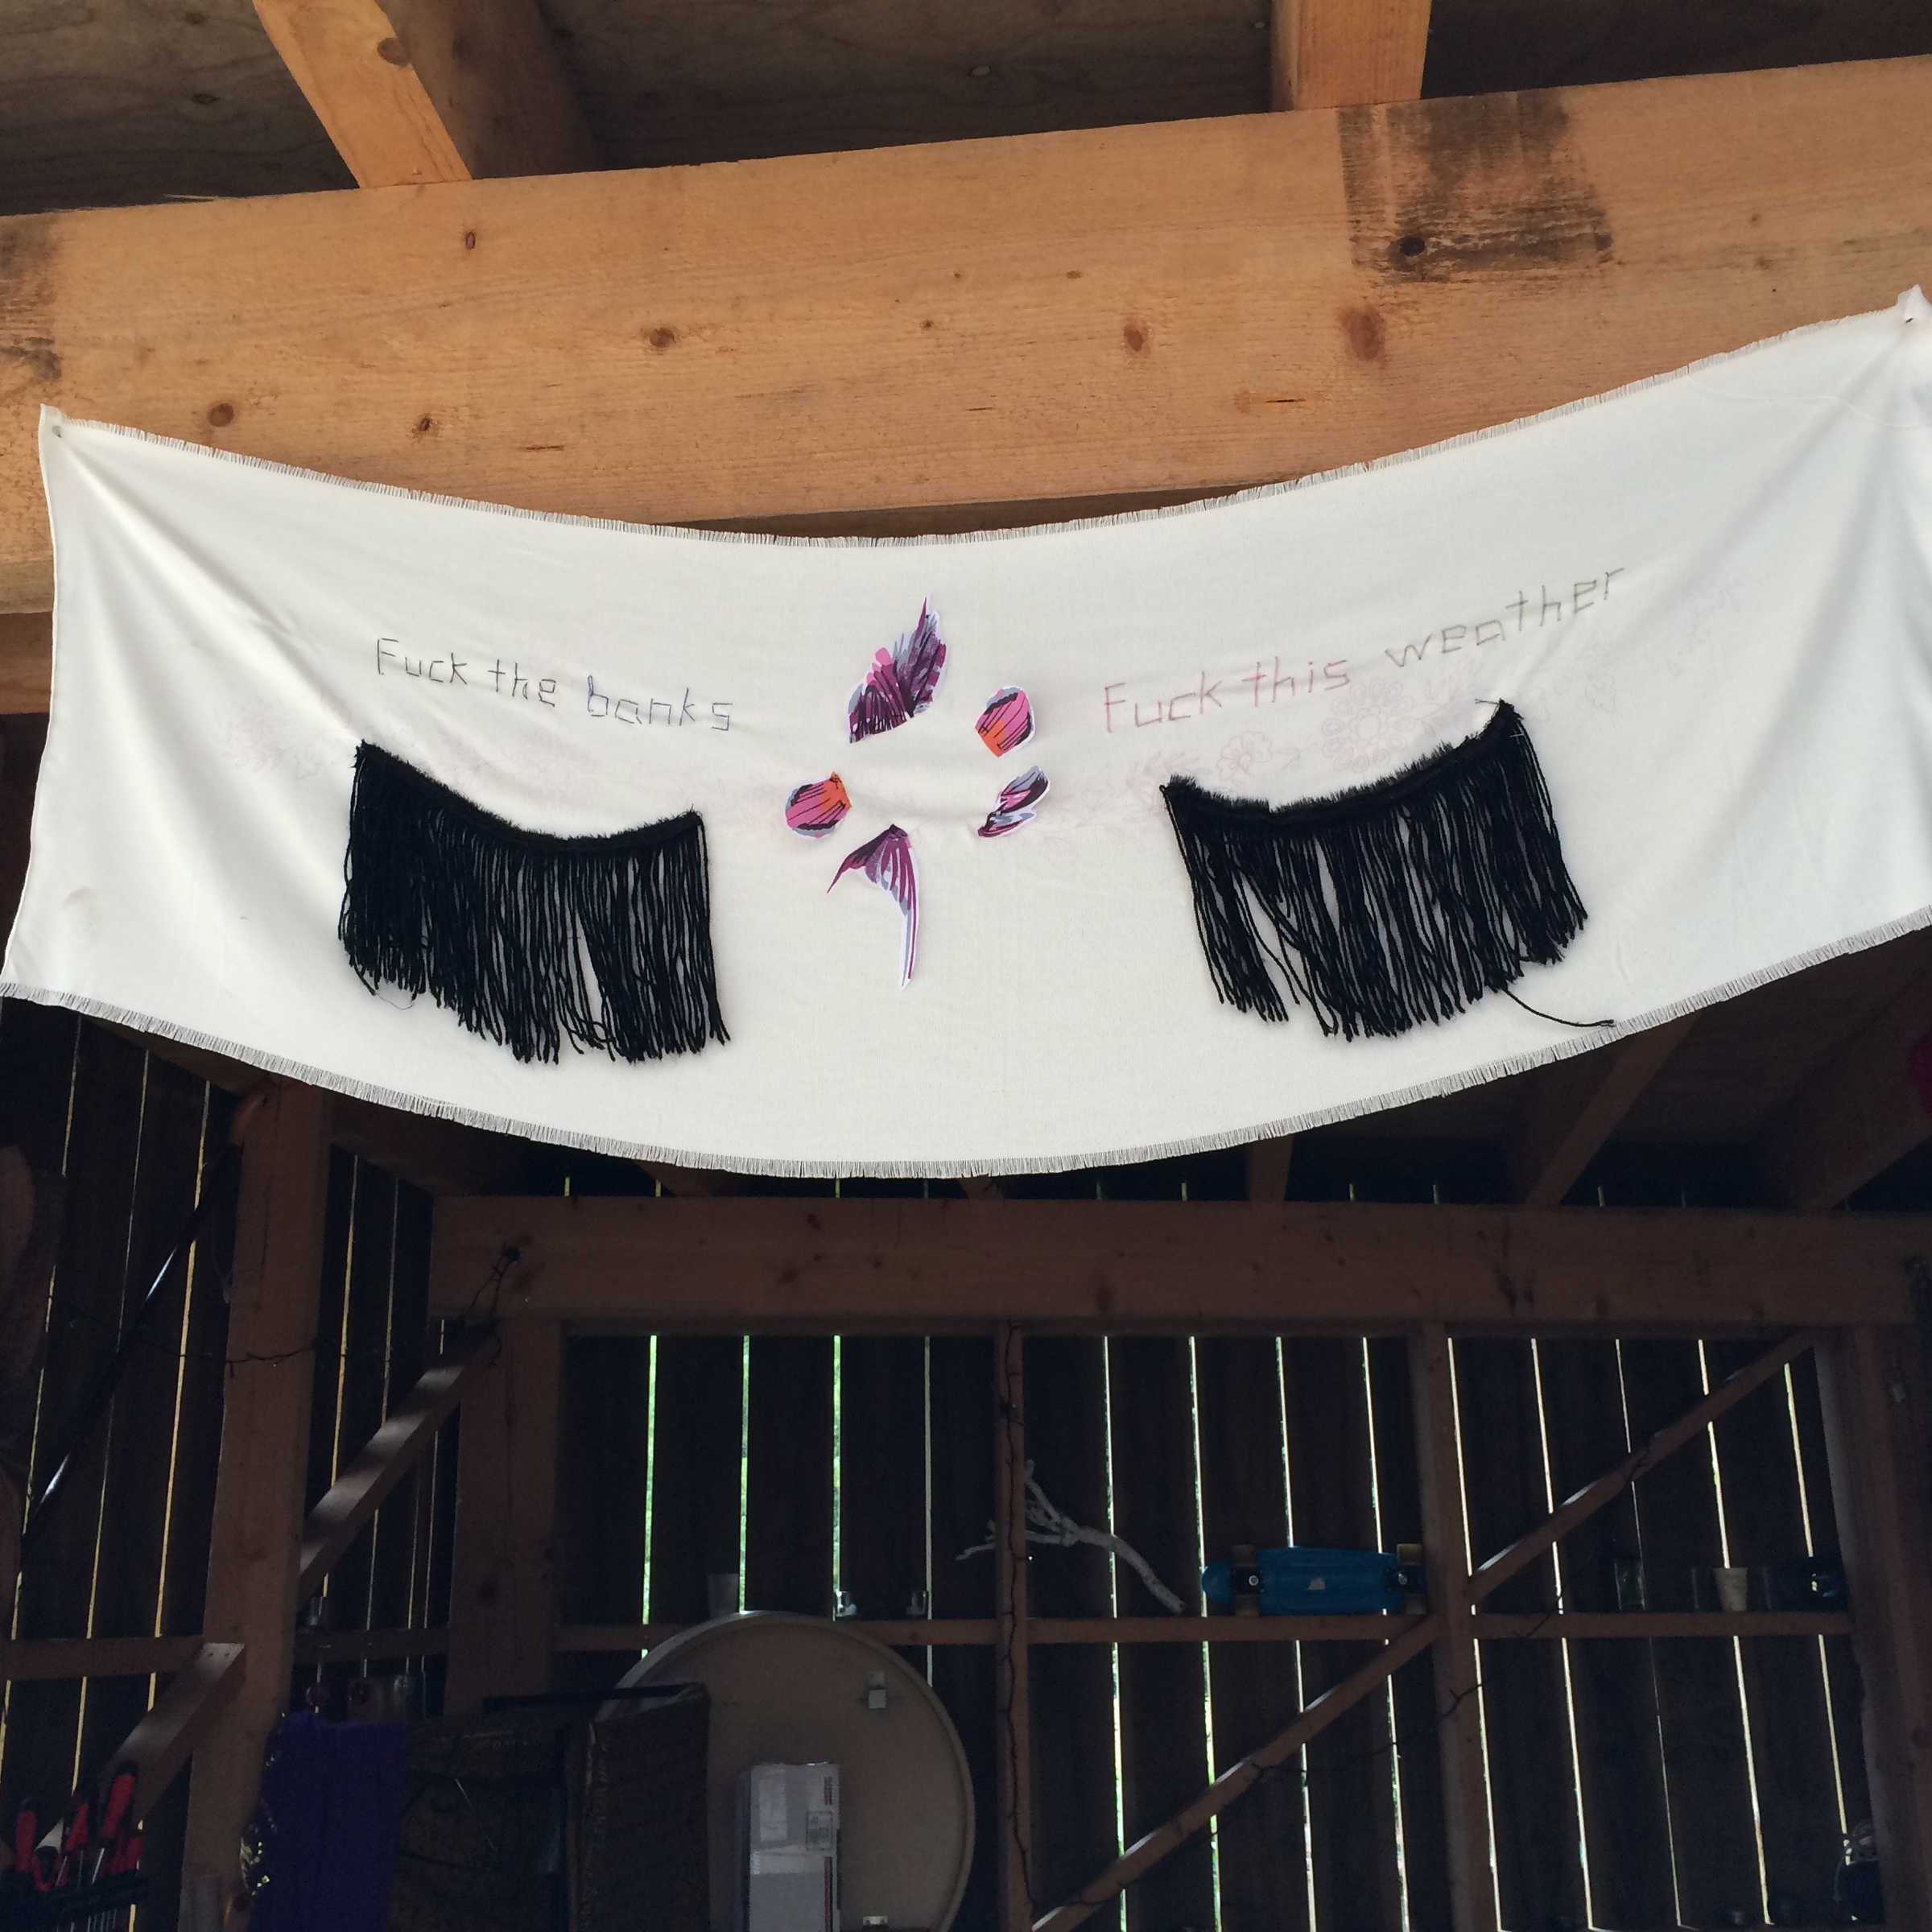 larose (DAI, 2017): Fuck the Bank 5 / Fuck this Weather ~ textile banner attached to the ceiling of the barn at the DAI-camp @ SONSBEEK 2016 in Arnhem.